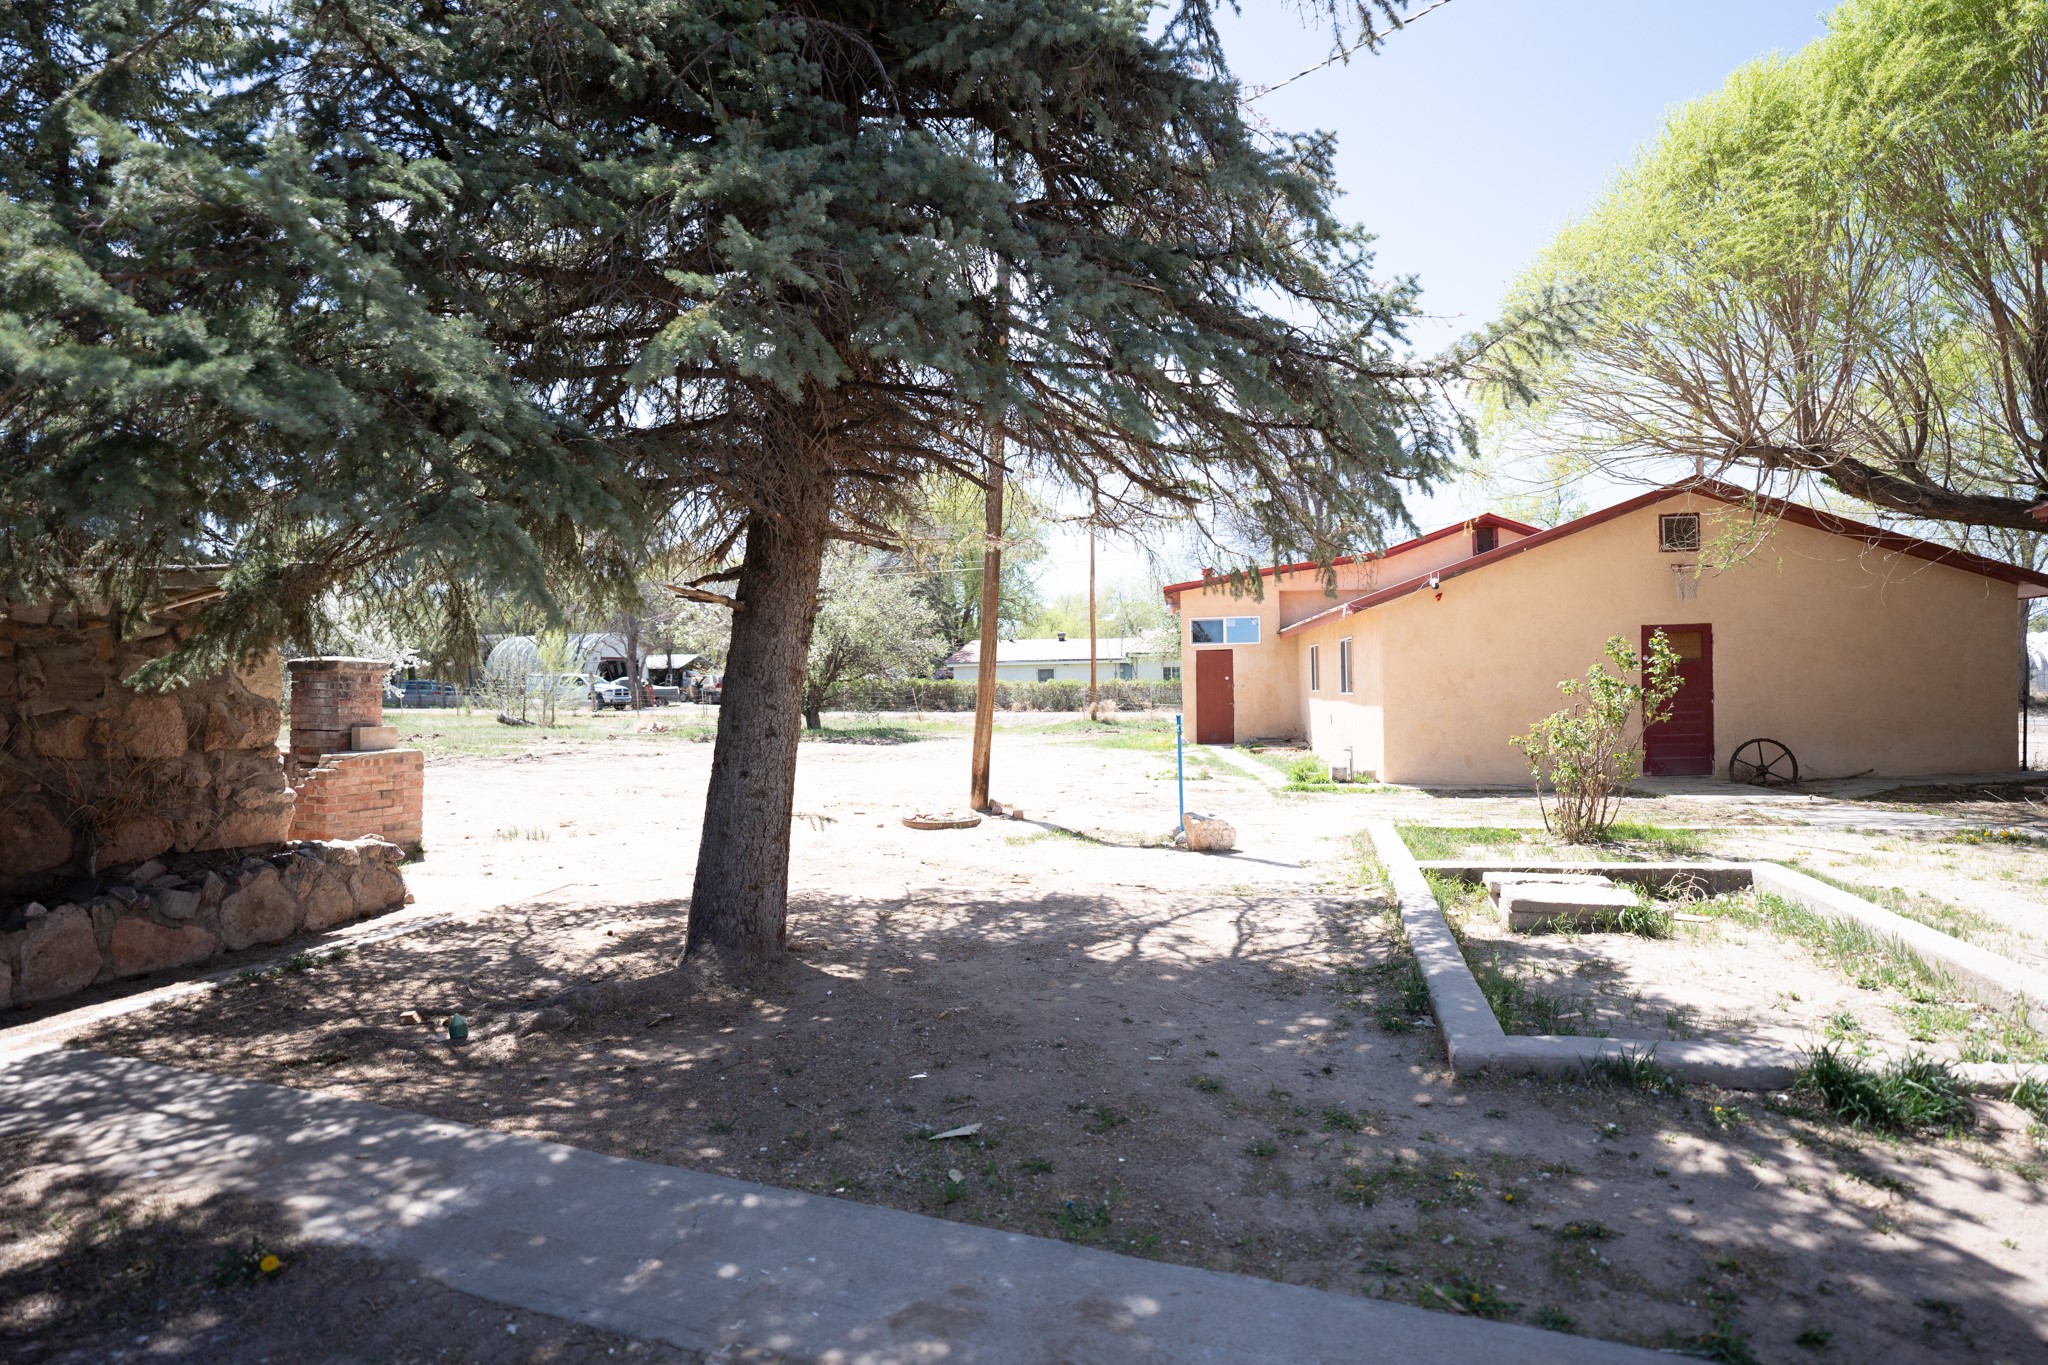 1715 N Mccurdy, Espanola, New Mexico 87532, 3 Bedrooms Bedrooms, ,2 BathroomsBathrooms,Residential,For Sale,1715 N Mccurdy,202401507